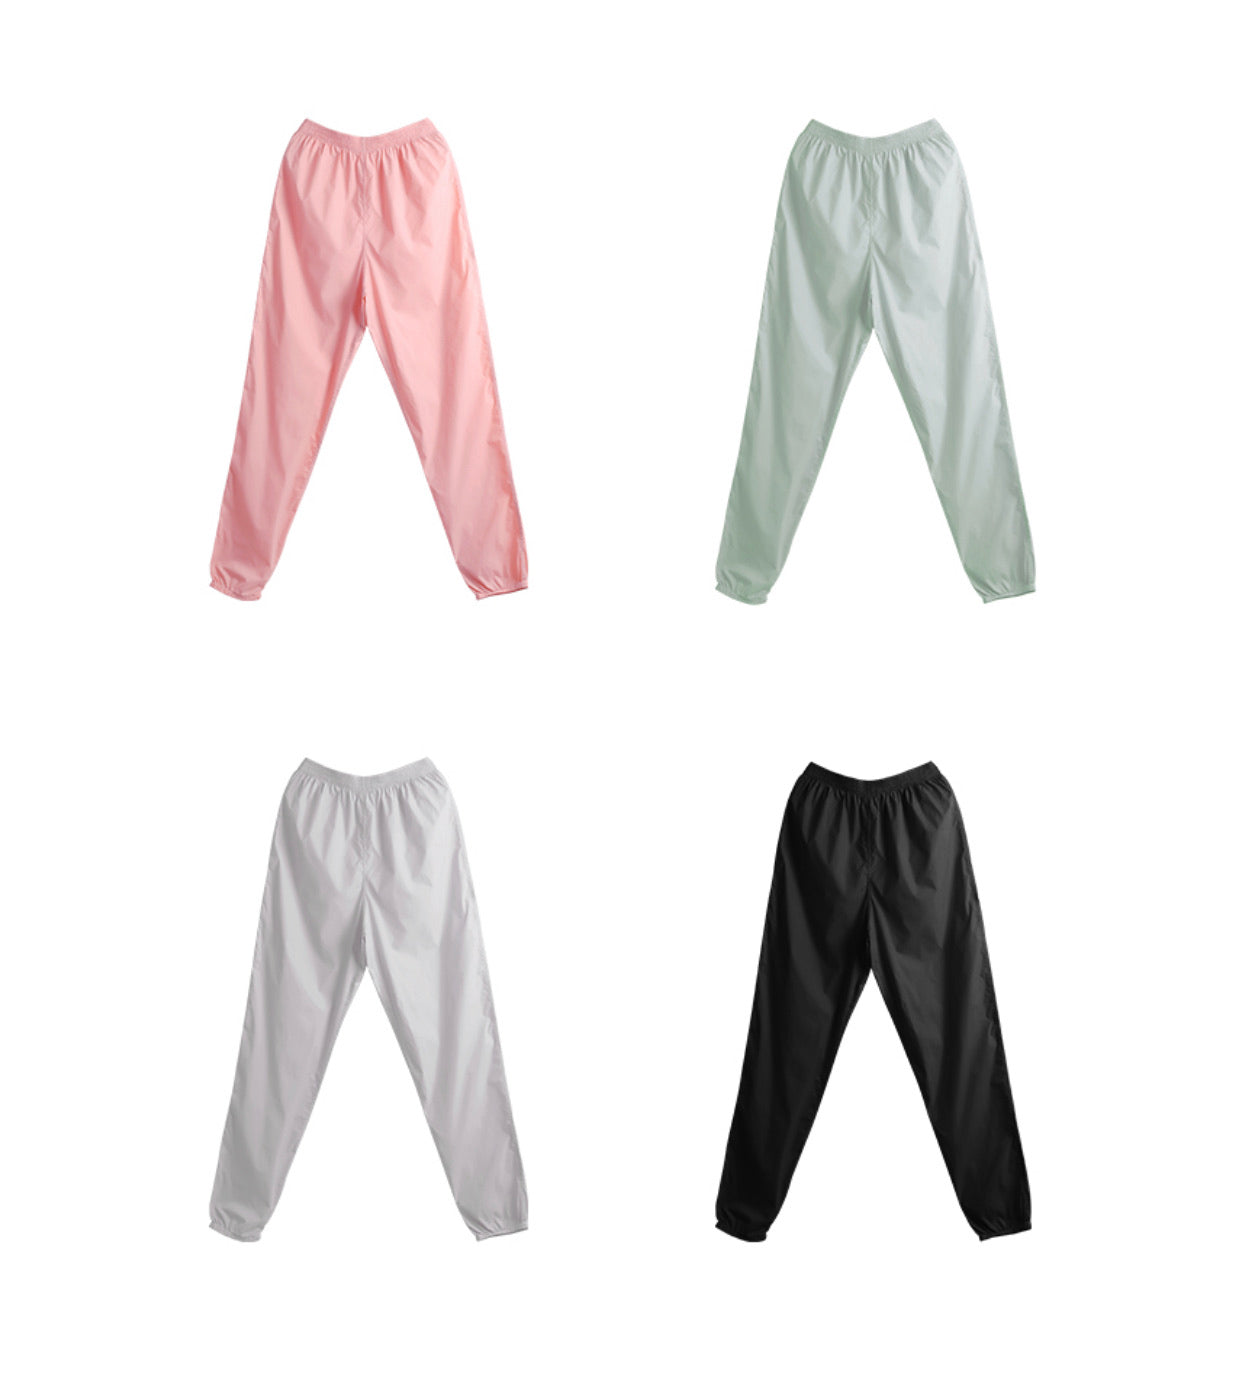 black trash pants / sauna pants / warmup pants for dancers from The Collective Dancewear. ALso available in pink, light grey and pistachio green